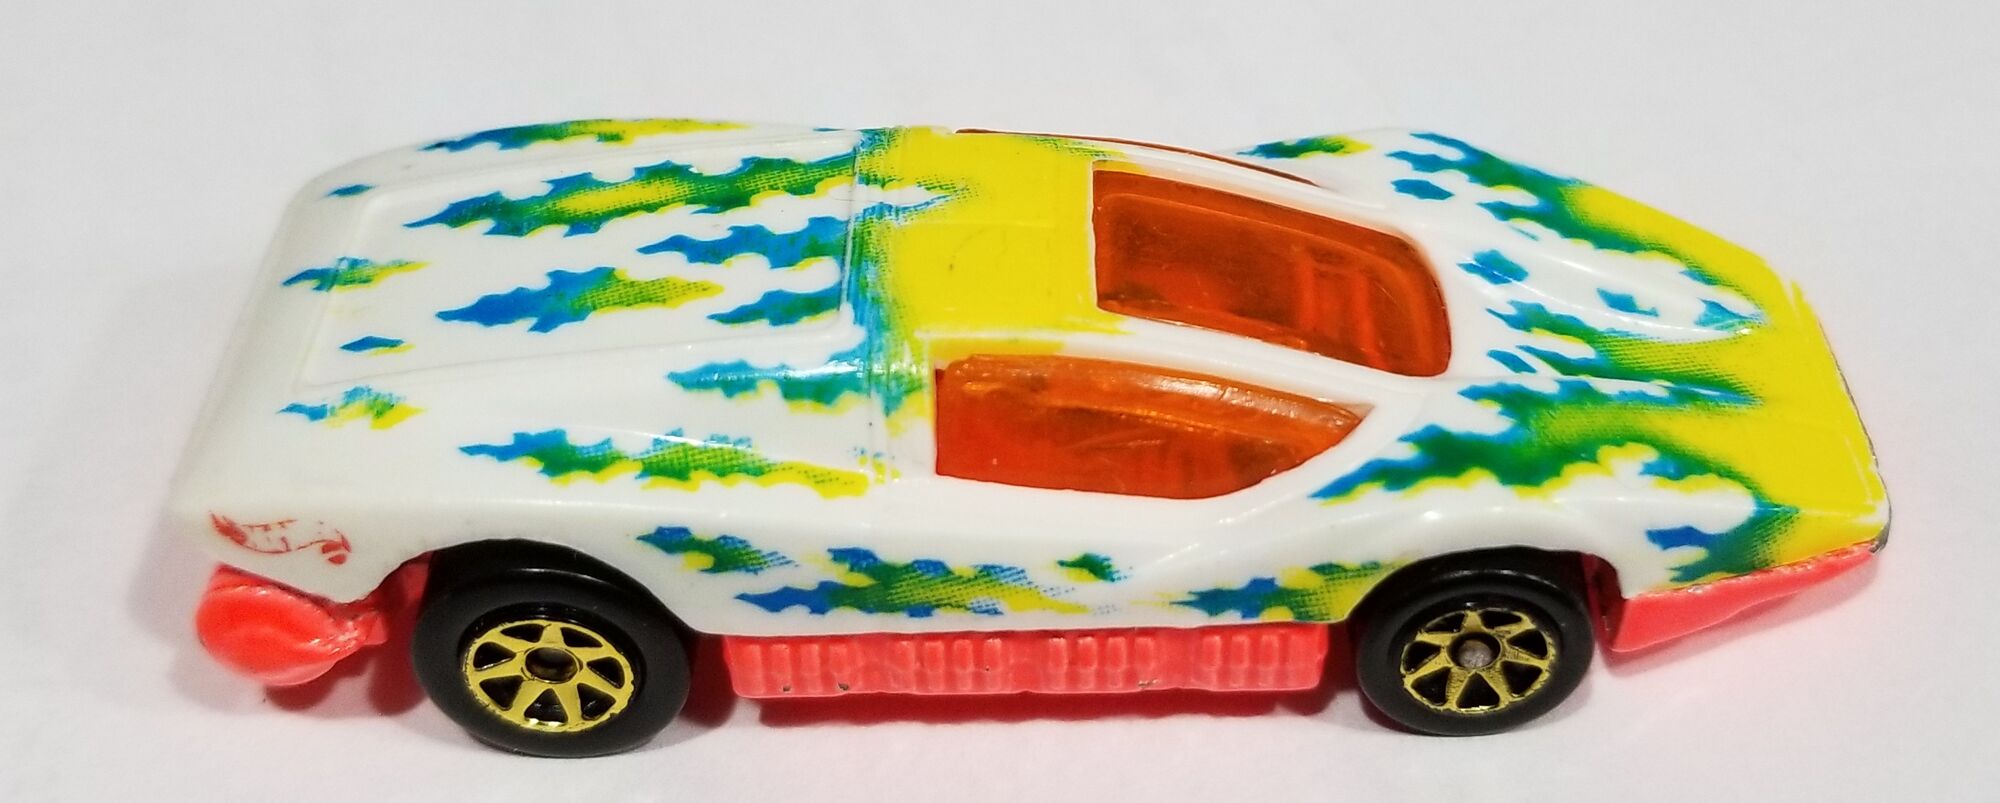 Details about   Hot Wheels 2001 Collector #229 Aeroflash